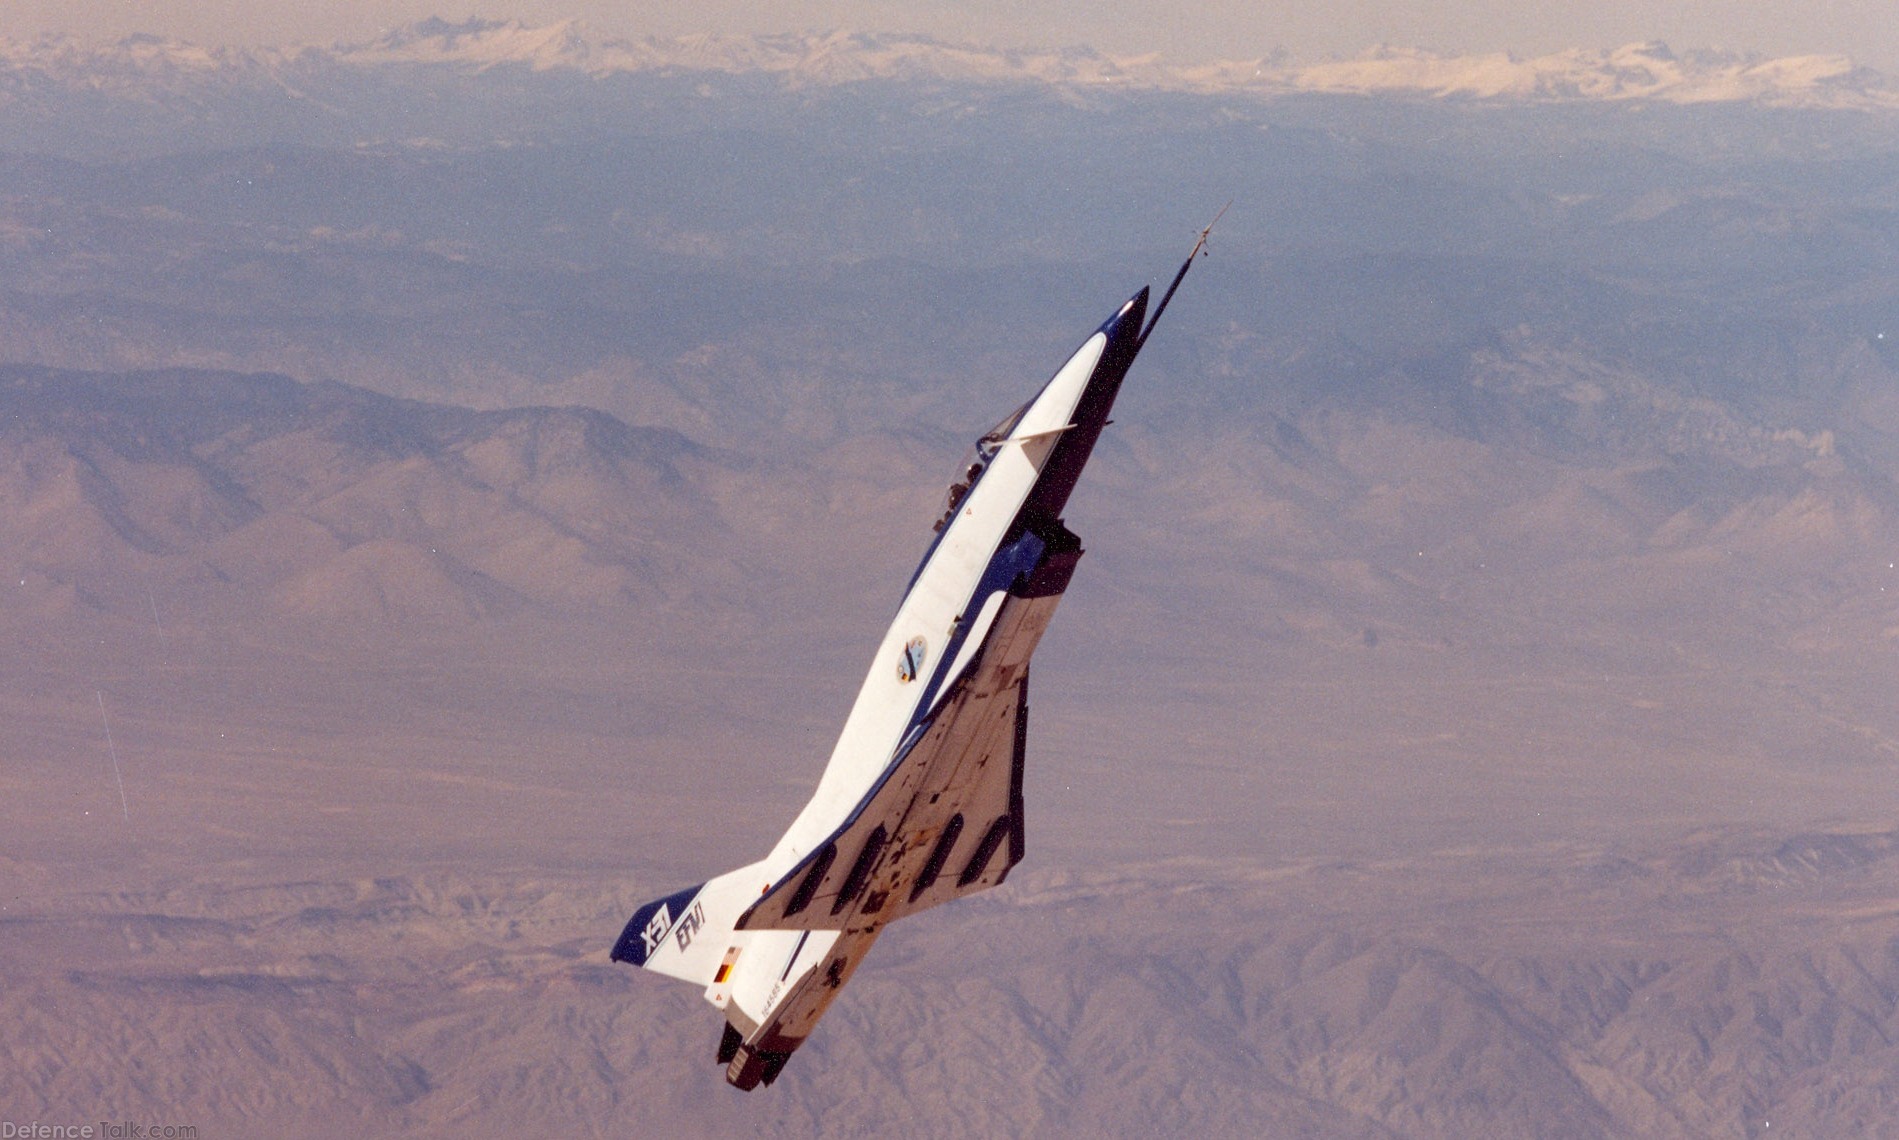 USAF X-31 Vector Research Aircraft